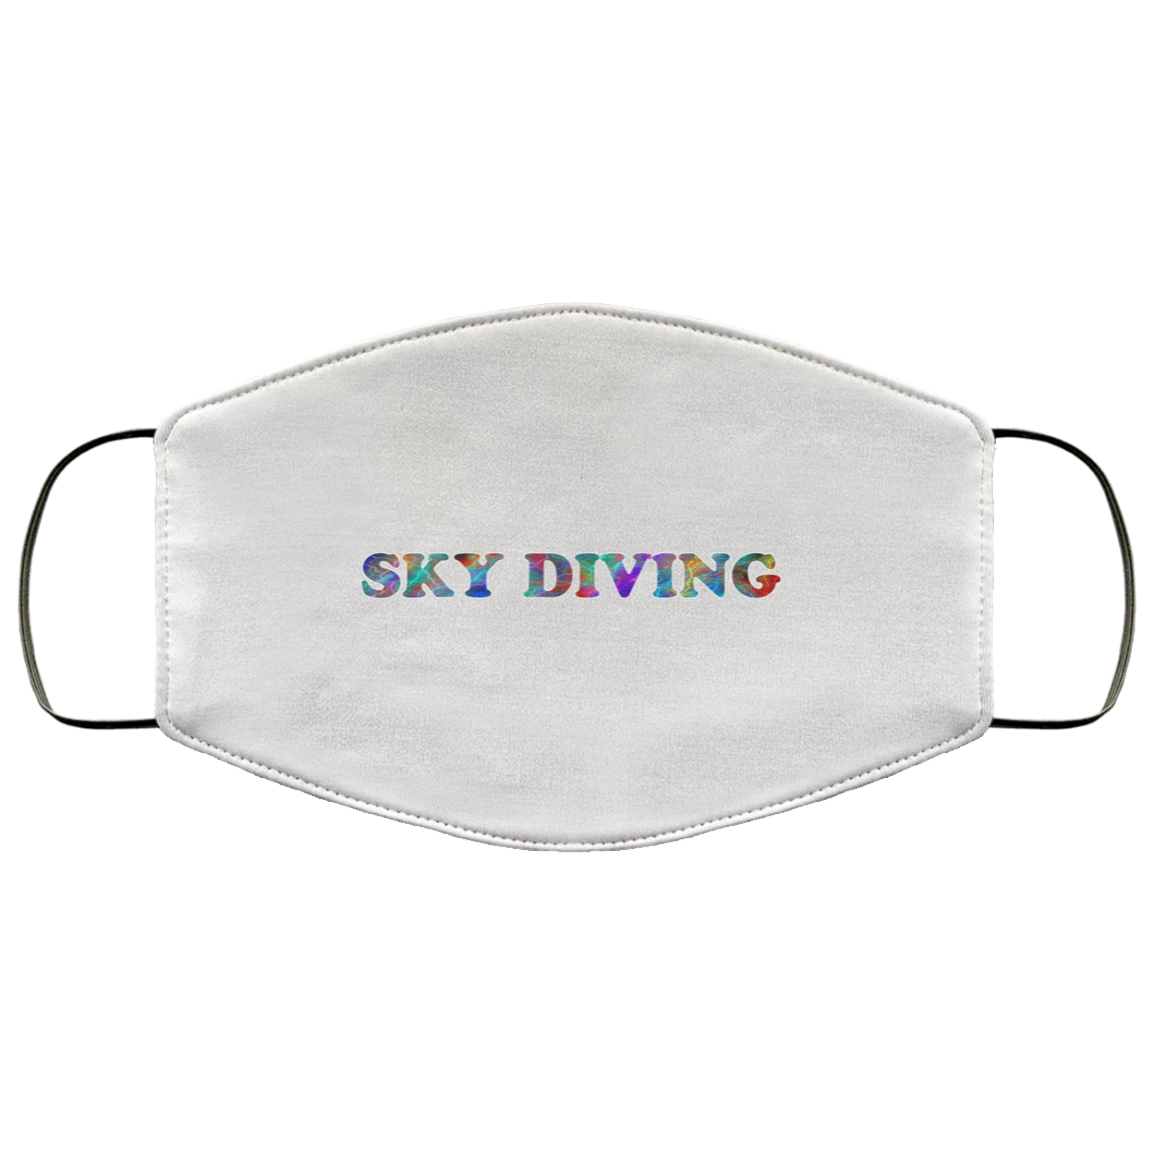 Sky Diving 2 Layer Protective Mask